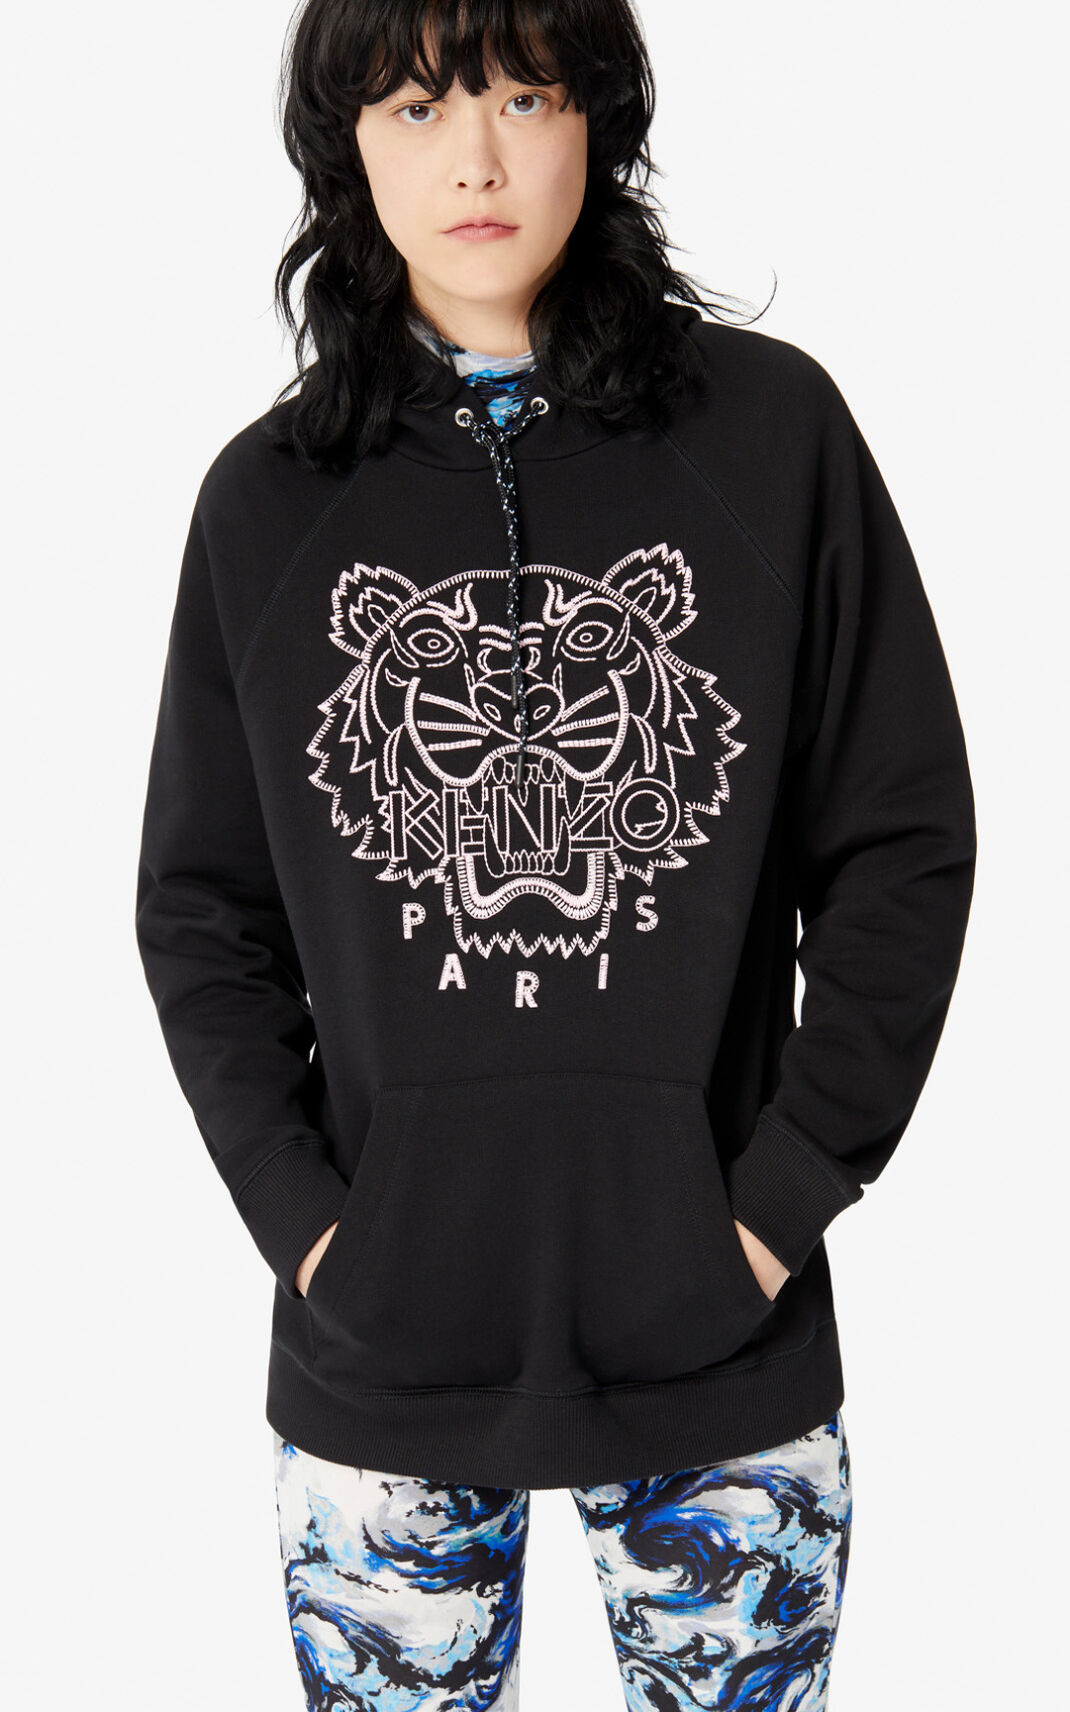 Kenzo Capsule Expedition Hoodie Black For Womens 2463GXCZS